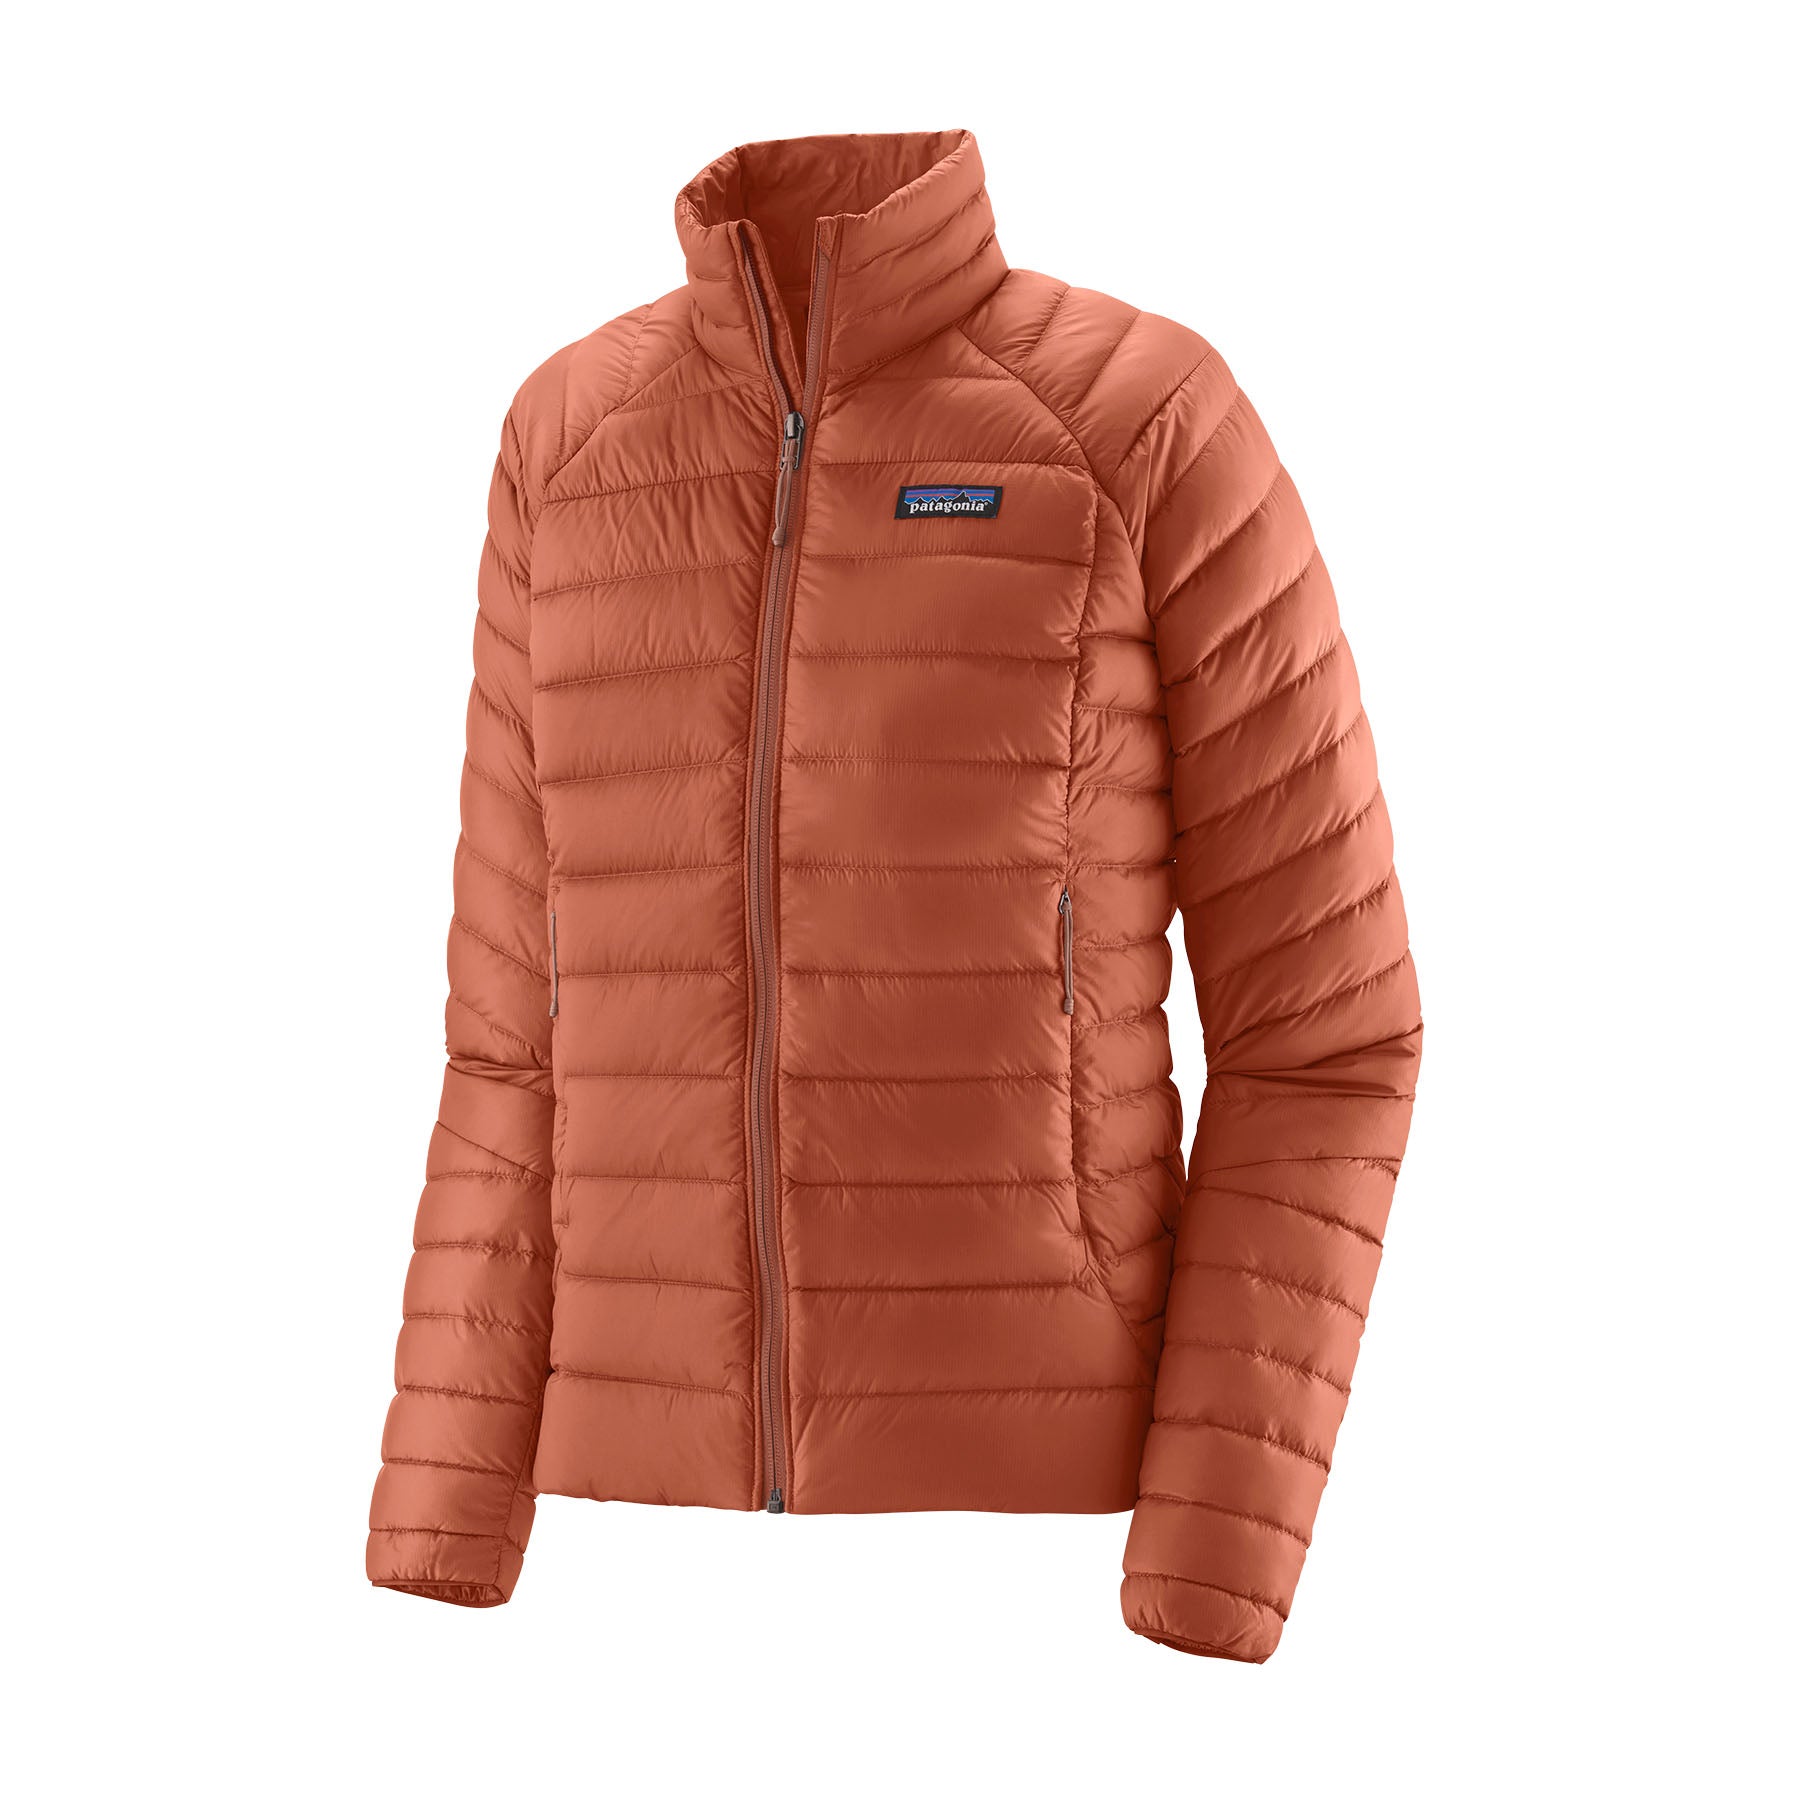 Women's Down Sweater in Sienna Clay | Patagonia Bend